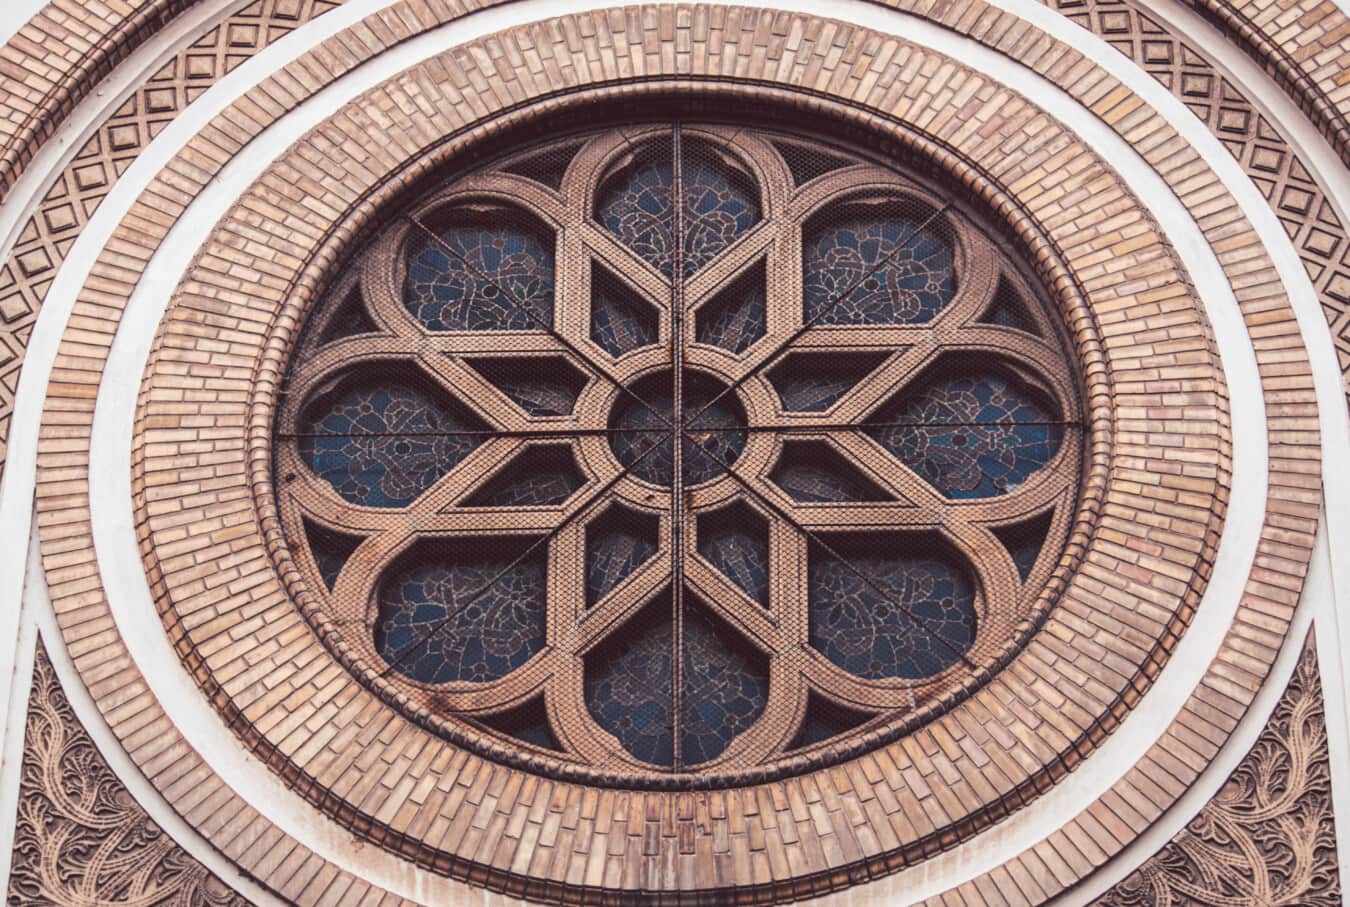 medieval, ornamental, window, bricks, wall, architectural style, heritage, architecture, round, art